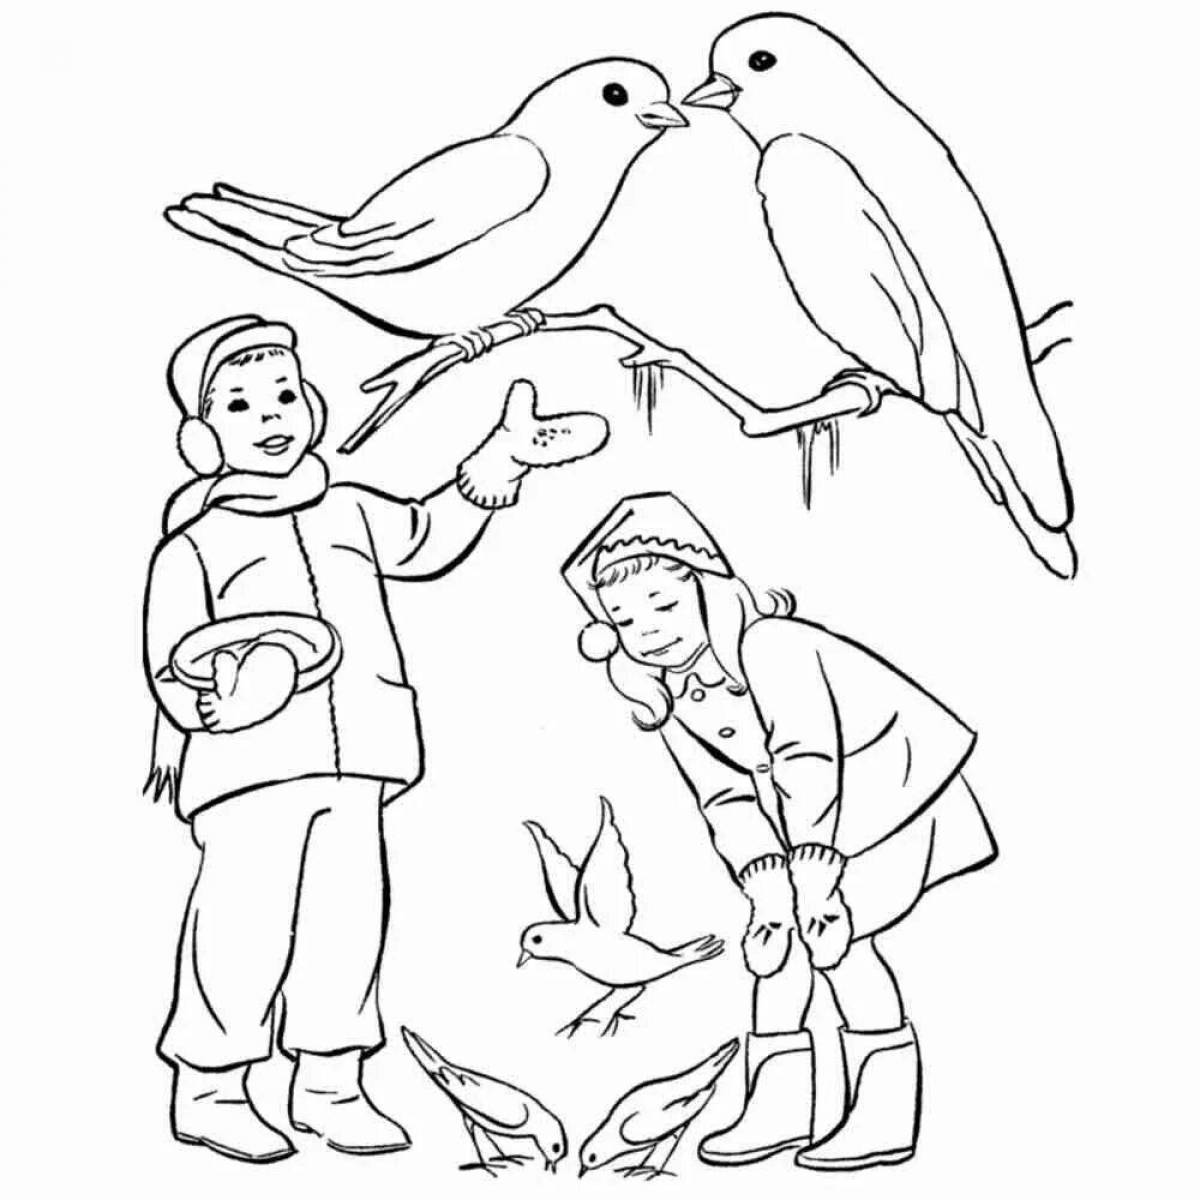 Coloring page of an attractive boy feeding pigeons